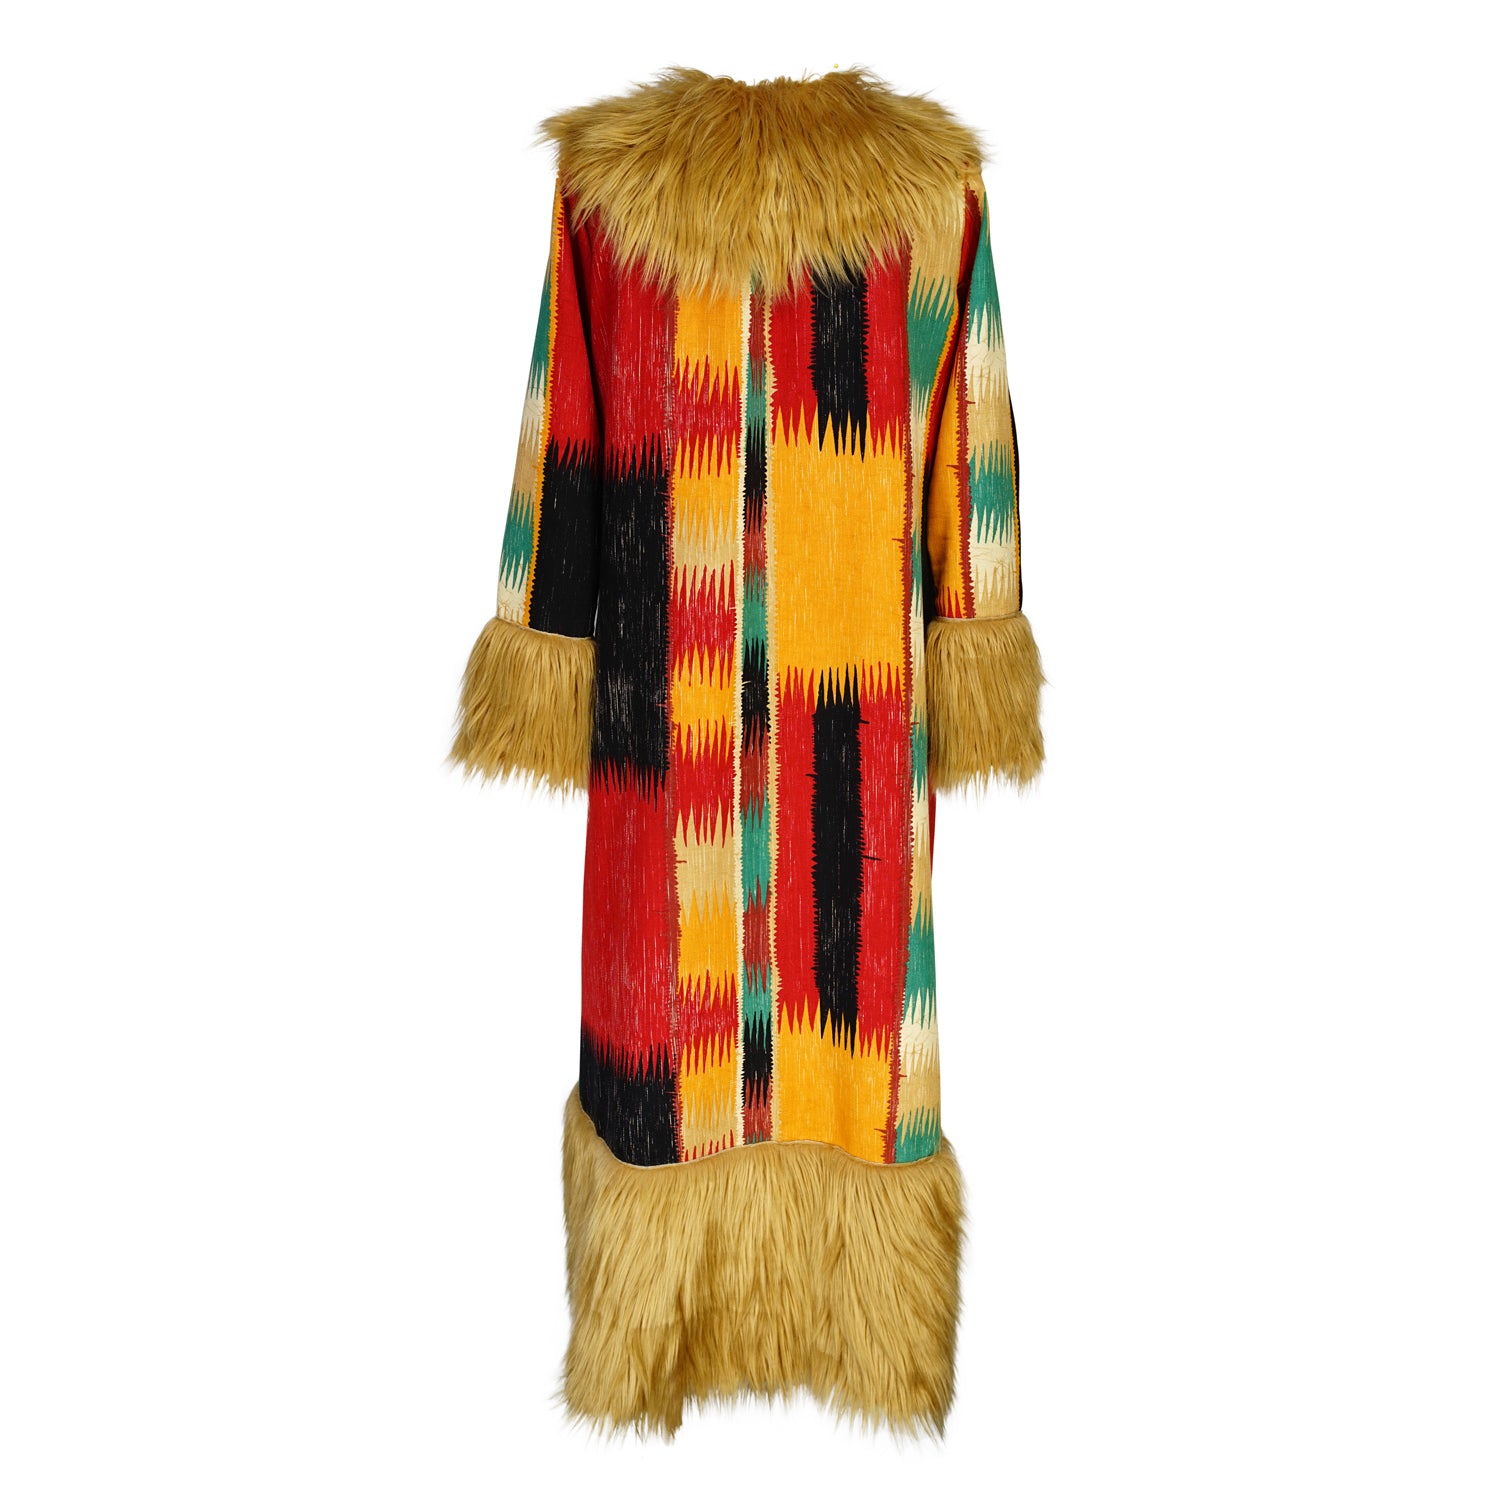 Long, penny lane style trench coat fashioned from a thick, abstract modernist colorblock print fabric featuring red, teal, yellow, black, and beige. Embellished with long tan faux fur along collar, lapel, cuffs, and hem. Retro bohemian color field art in style.